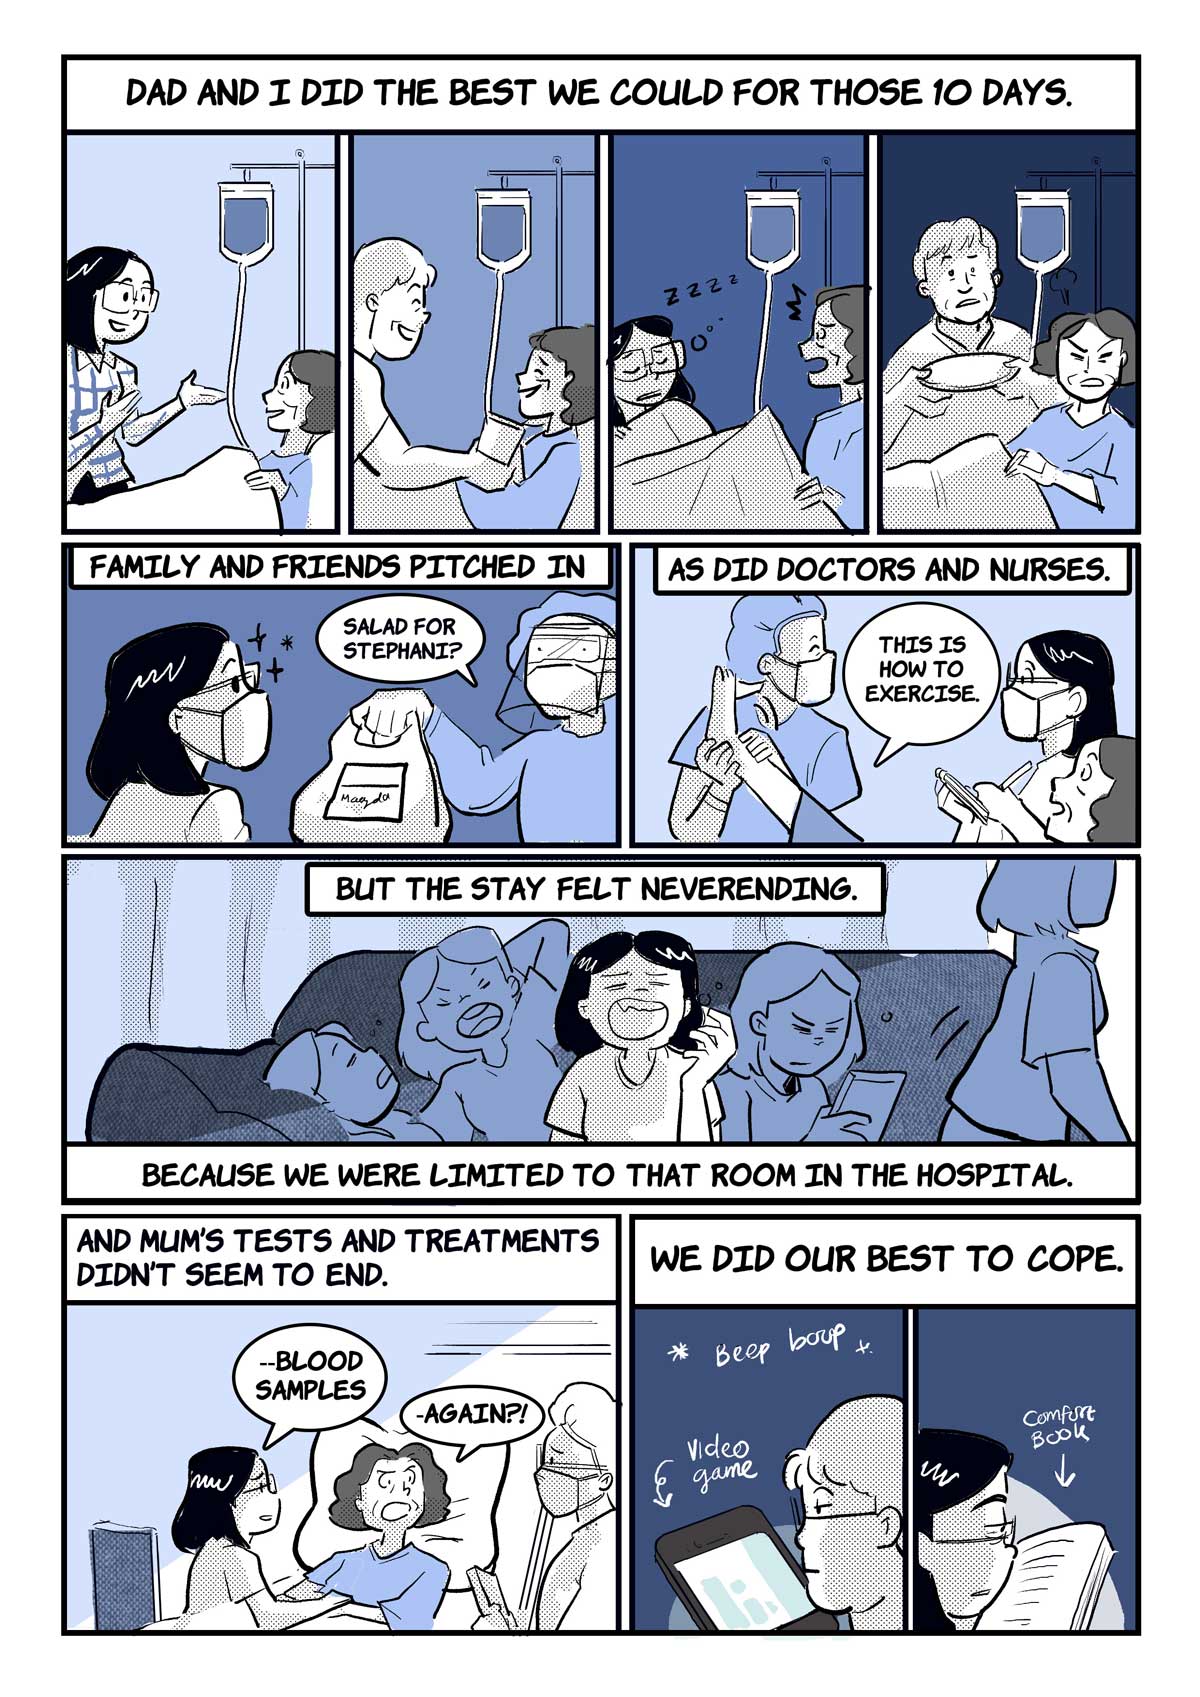 A comic page of 9 panels in black and various shades of blue and grey. The narration is provided in caption boxes.
Panels 1 to 4. Narrator: "Dad and I did the best we could for those 10 days." A montage of scenes by her mother's hospital bed: Stephani and her father take turns talking to her mother. Her father offers her a glass of water. Stephani falls asleep. Her mother refuses a plate of food.
Panel 5. Narrator: "Family and friends pitched in." A nurse in full PPE equipment holds out a bag of food, saying, "Salad for Stephani?". 
Panel 6. Narrator: "As did doctors and nurses." A doctor demonstrates how to raise her mother's leg, explaining, "This is how to exercise."
Panel 7. Narrator: "But the stay felt neverending because we were limited to that room in the hospital." Stephani is shown in different positions on the same couch - sleeping, yawning, looking at her phone, getting up.
Panel 8. Narrator: "And Ma’s tests and treatments didn’t seem to end." Stephani meekly says: "...blood samples—" to her mother, who snaps, "Again?!". A nurse waits by the bedside to take the samples.
Panel 9. Narrator: "We did our best to cope." Stephani's father occupies himself with a video game. Stephani reads a comfort book.